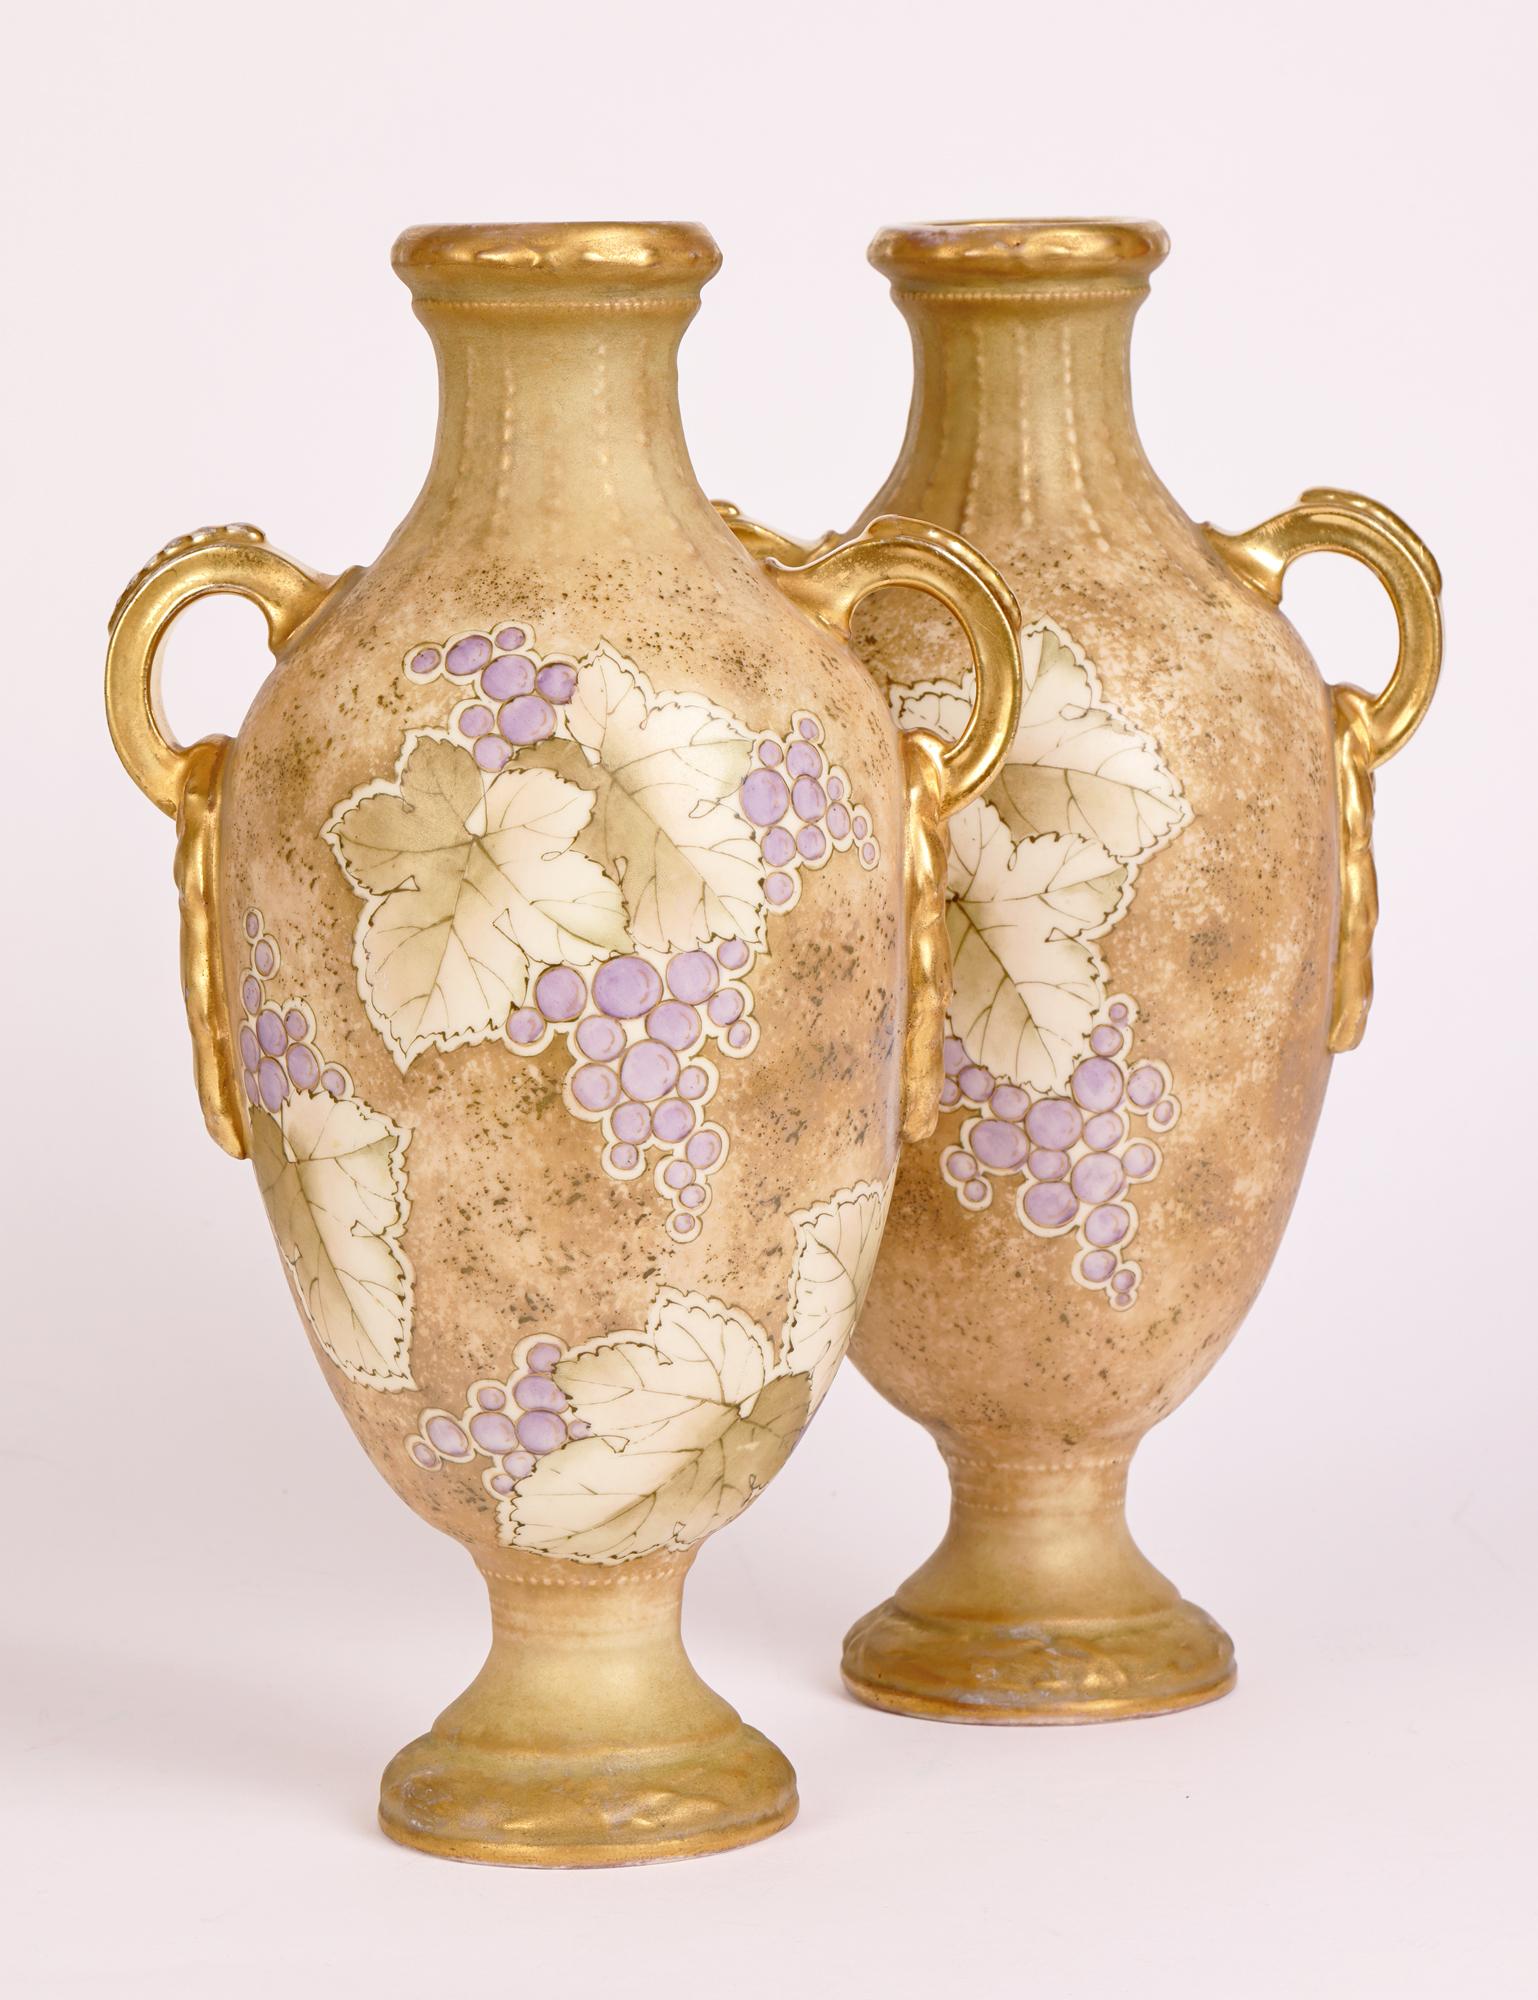 Turn Teplitz RSK Amphora Pair Art Nouveau Hand-Painted Twin Handled Vases For Sale 7